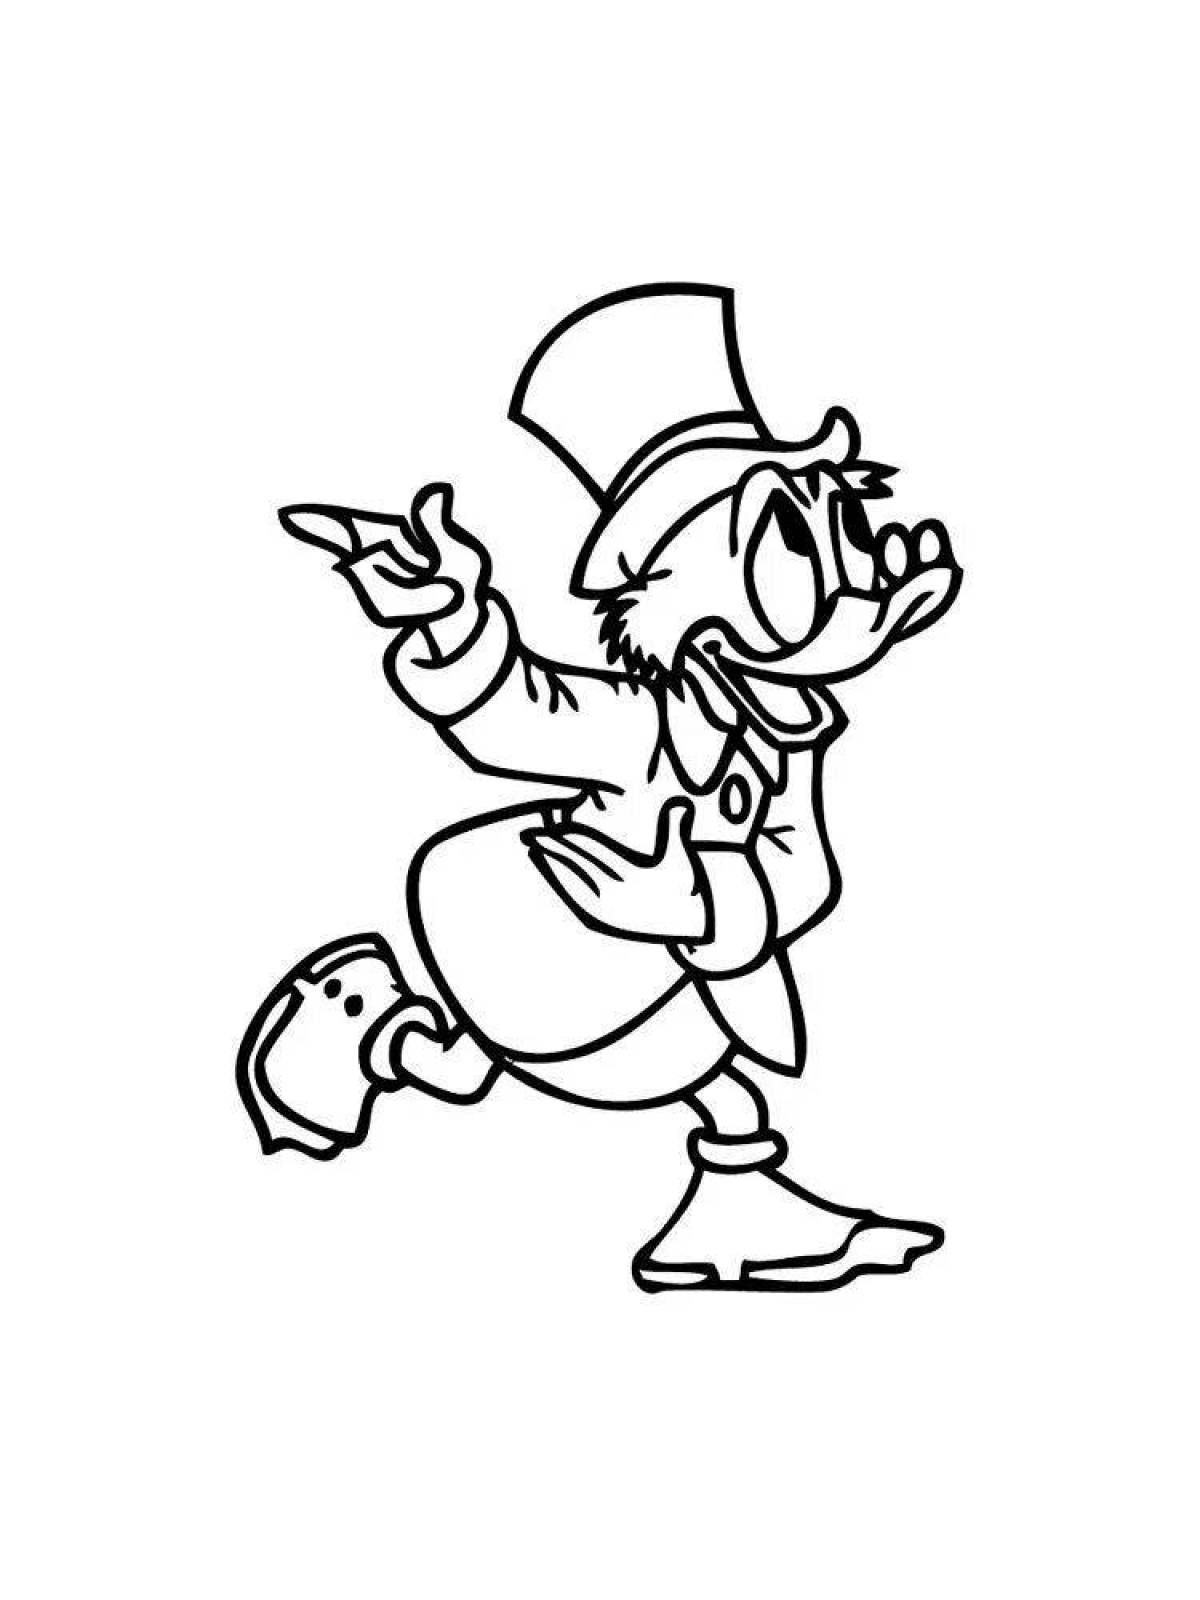 Exciting scrooge coloring book